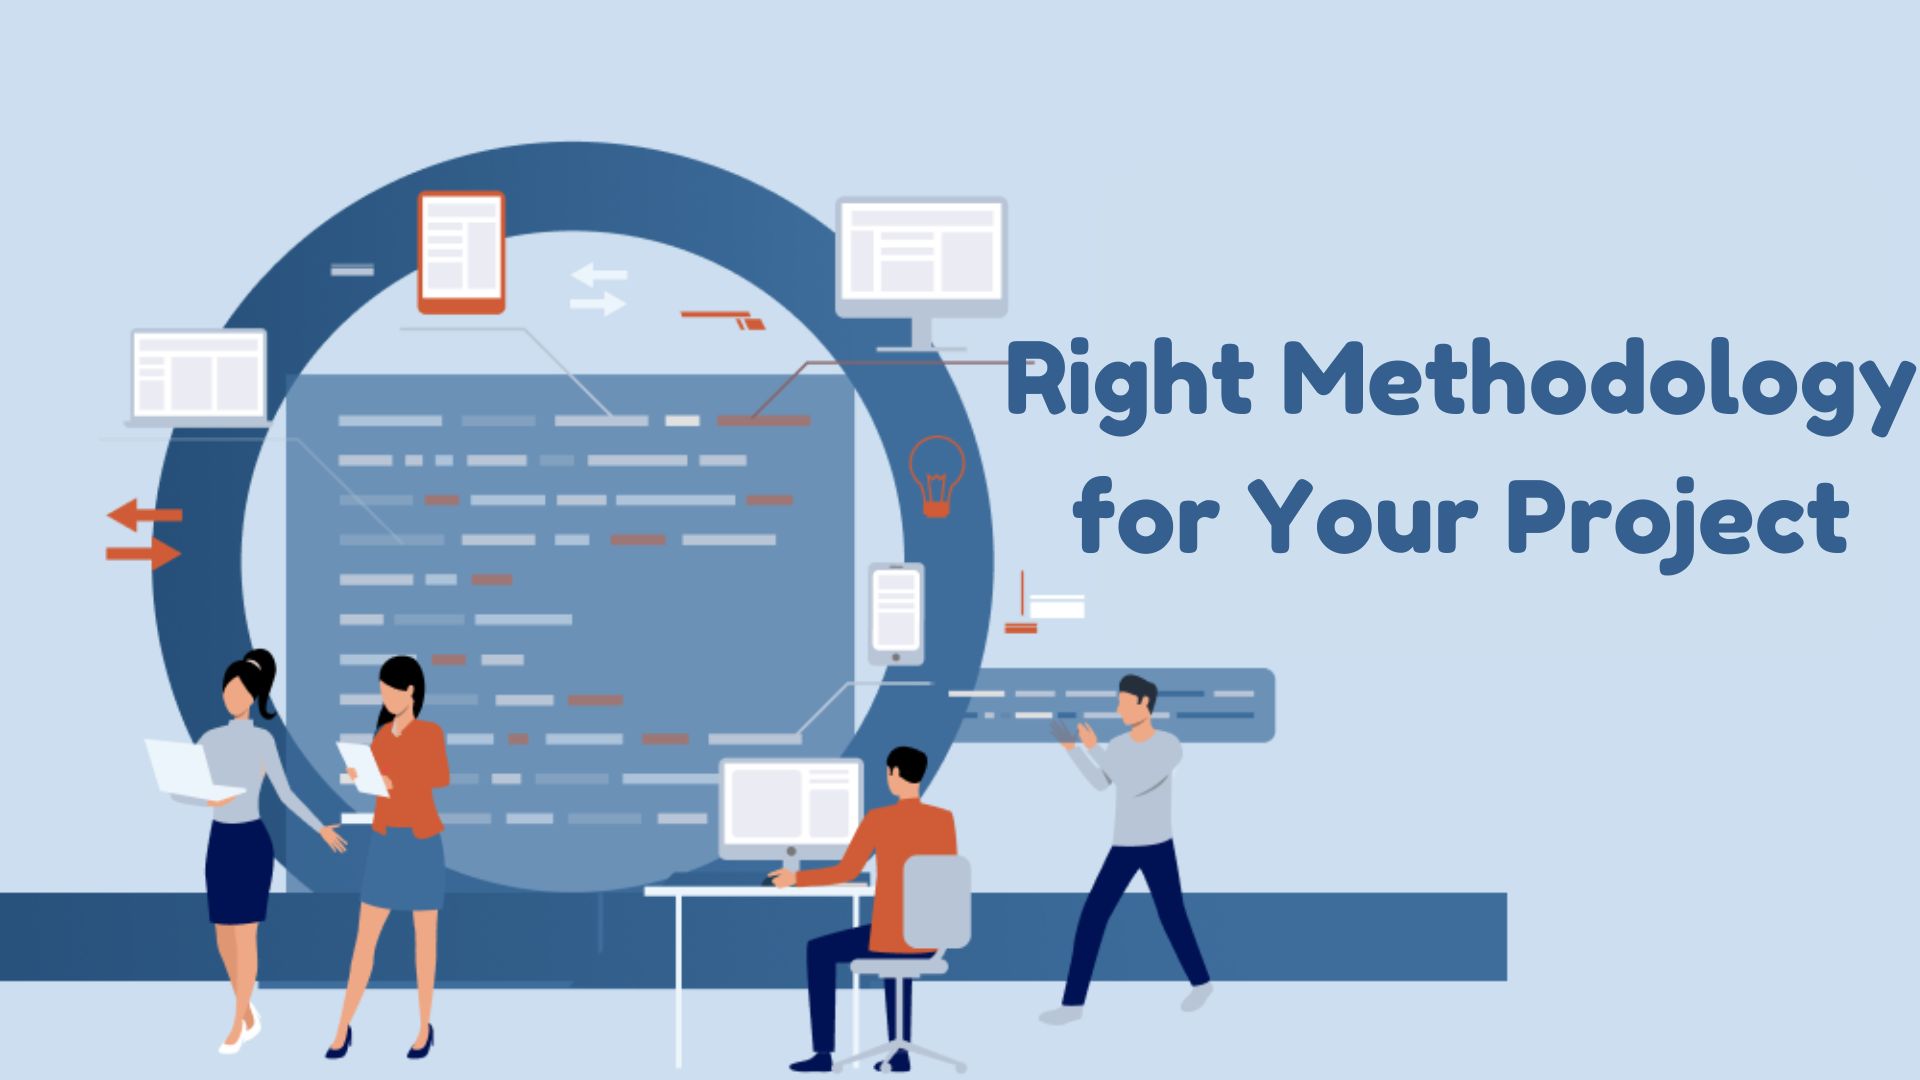 Choosing the Right Methodology for Your Project